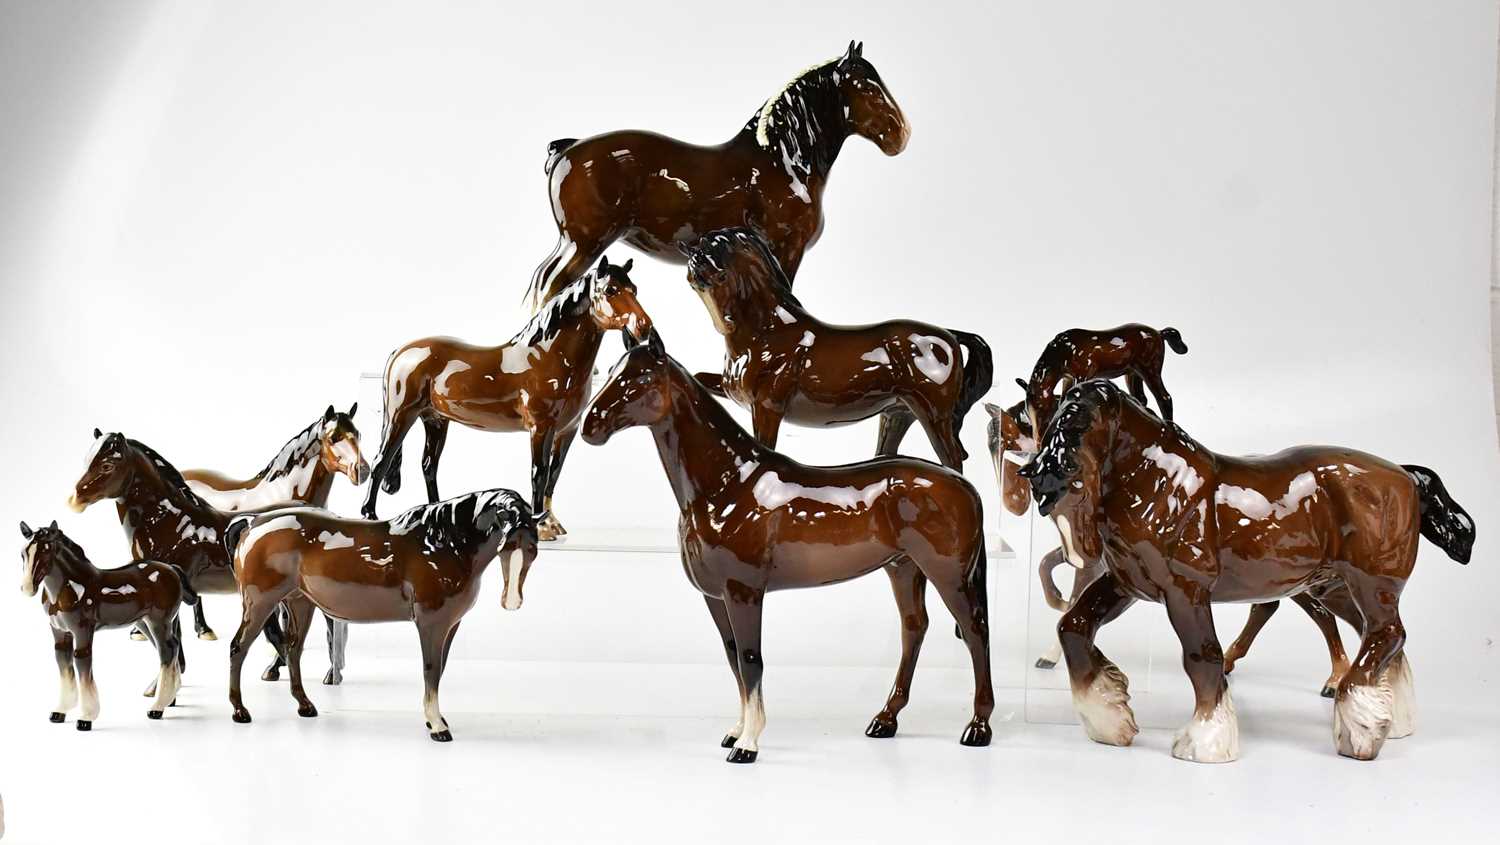 BESWICK; twelve models of horses, mainly chestnut and bay to include shire, mares and foals (12).